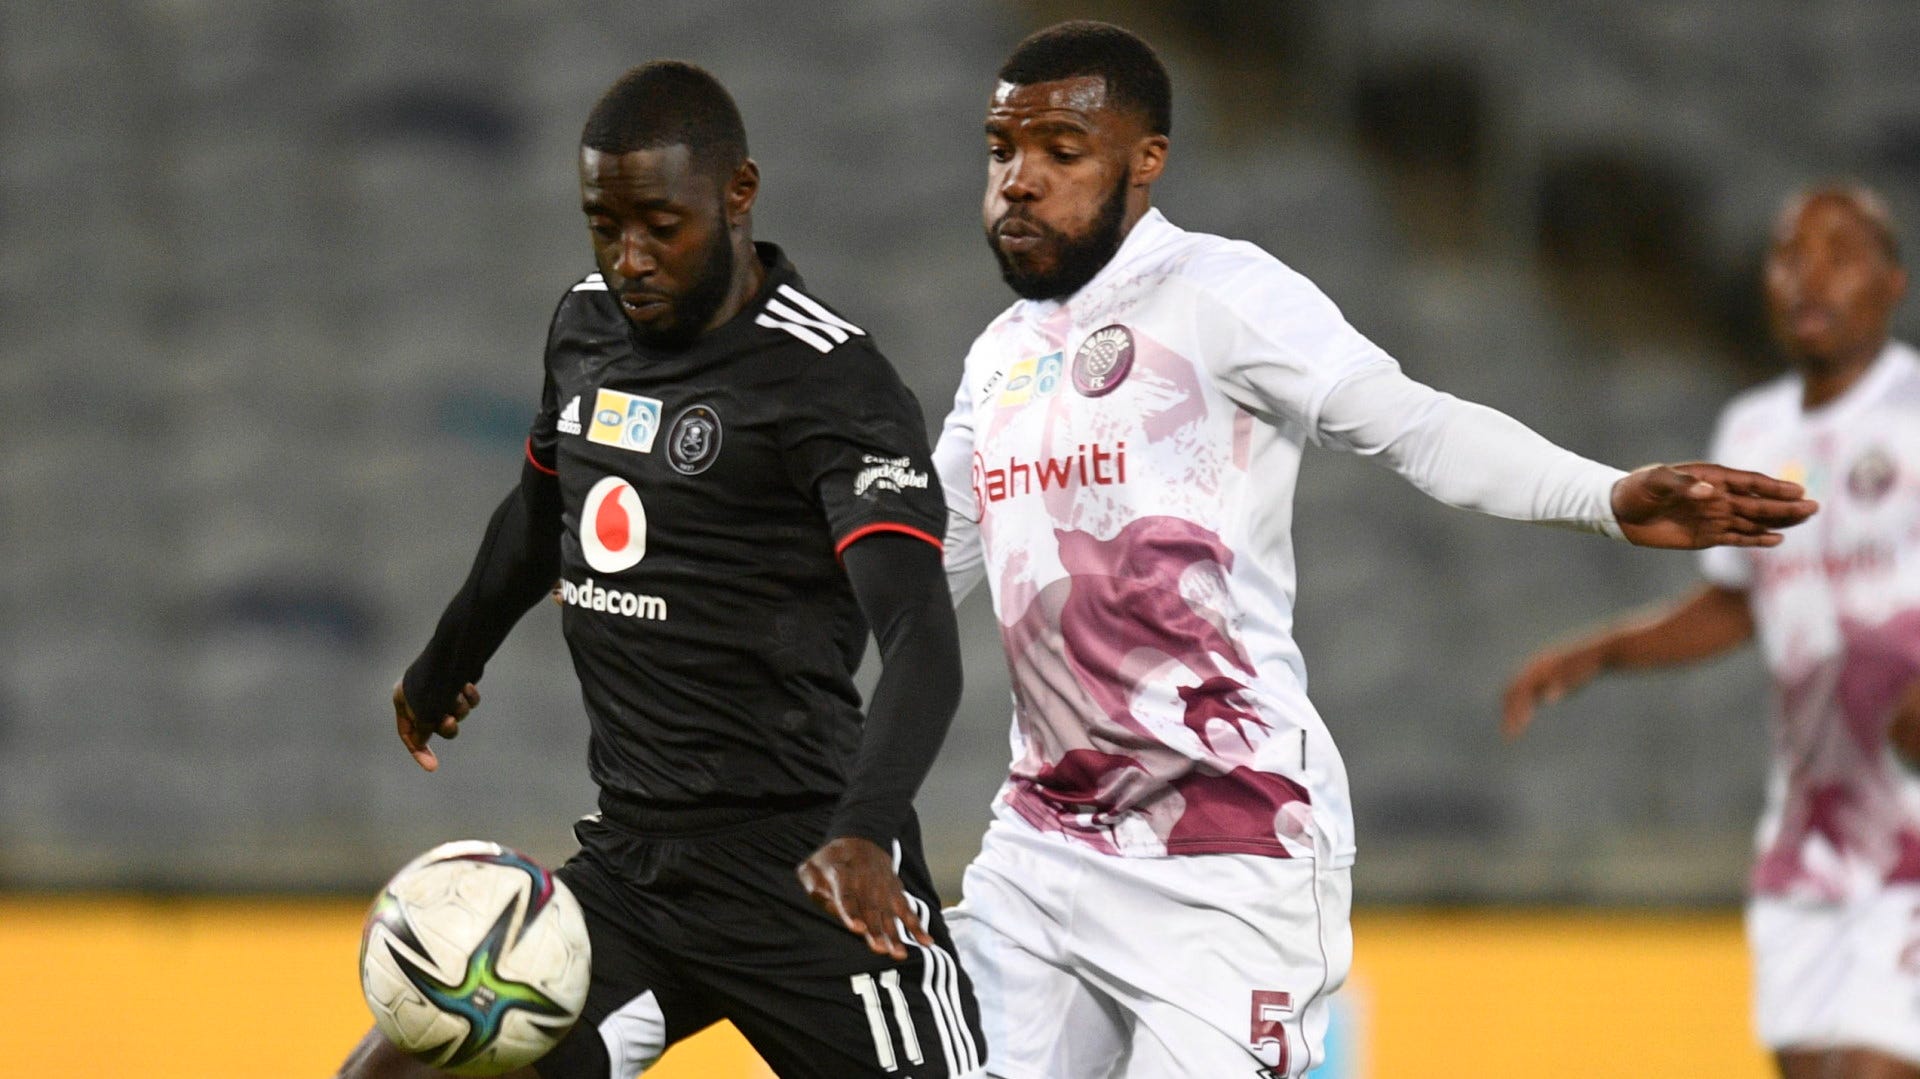 Deon Hotto and Wandisile Letlabika, Orlando Pirates vs Swallows FC, August 2021